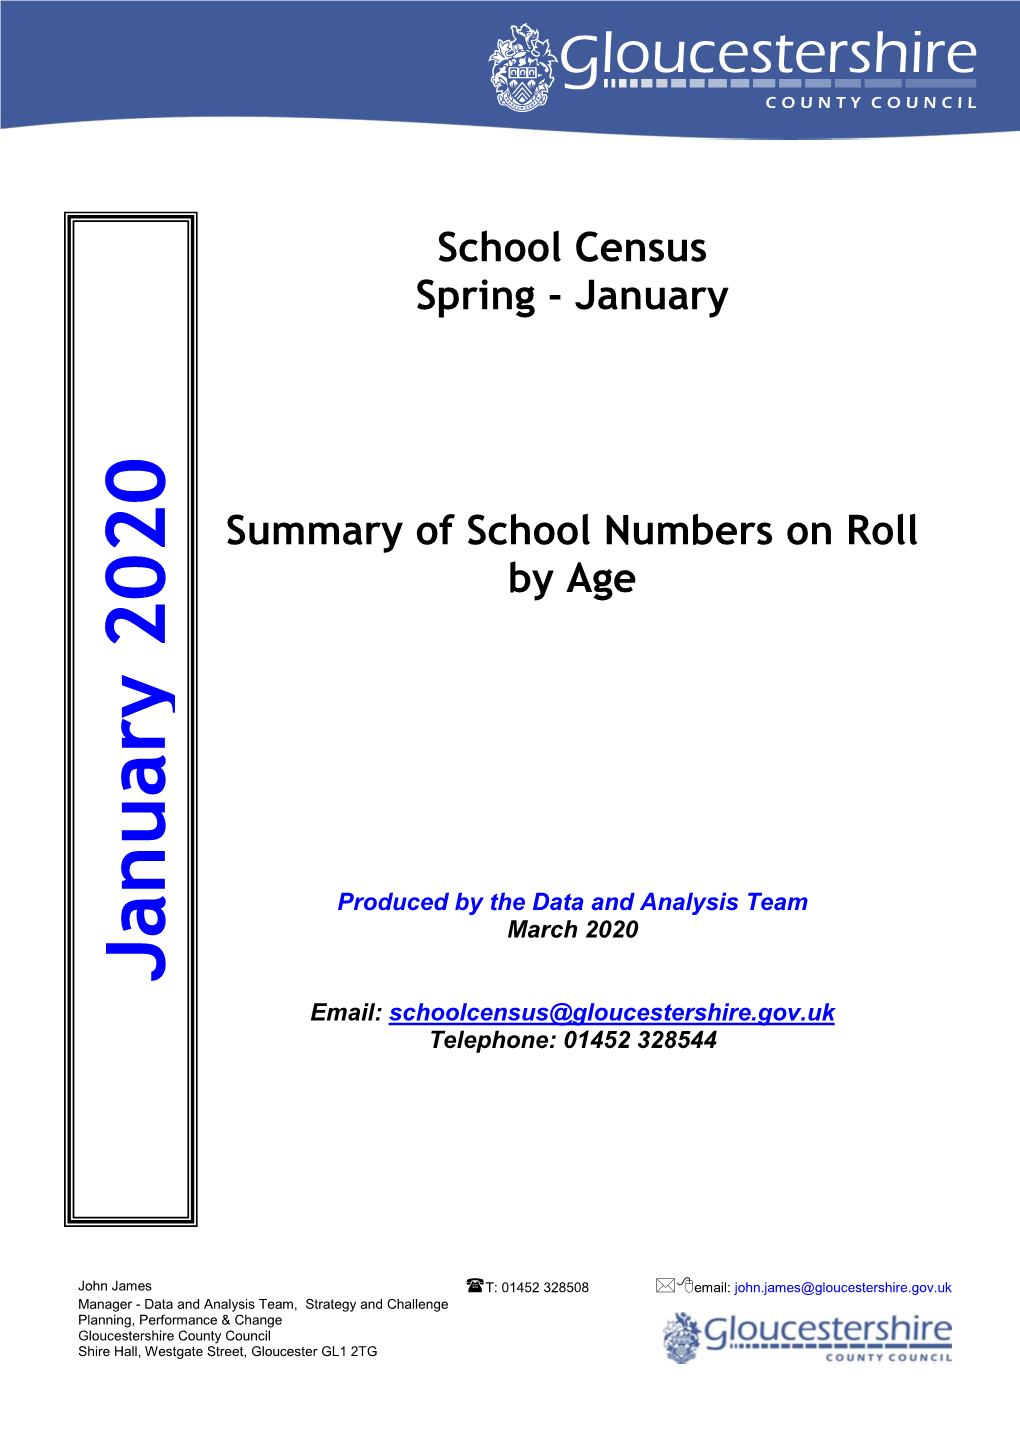 School Numbers on Roll by Age